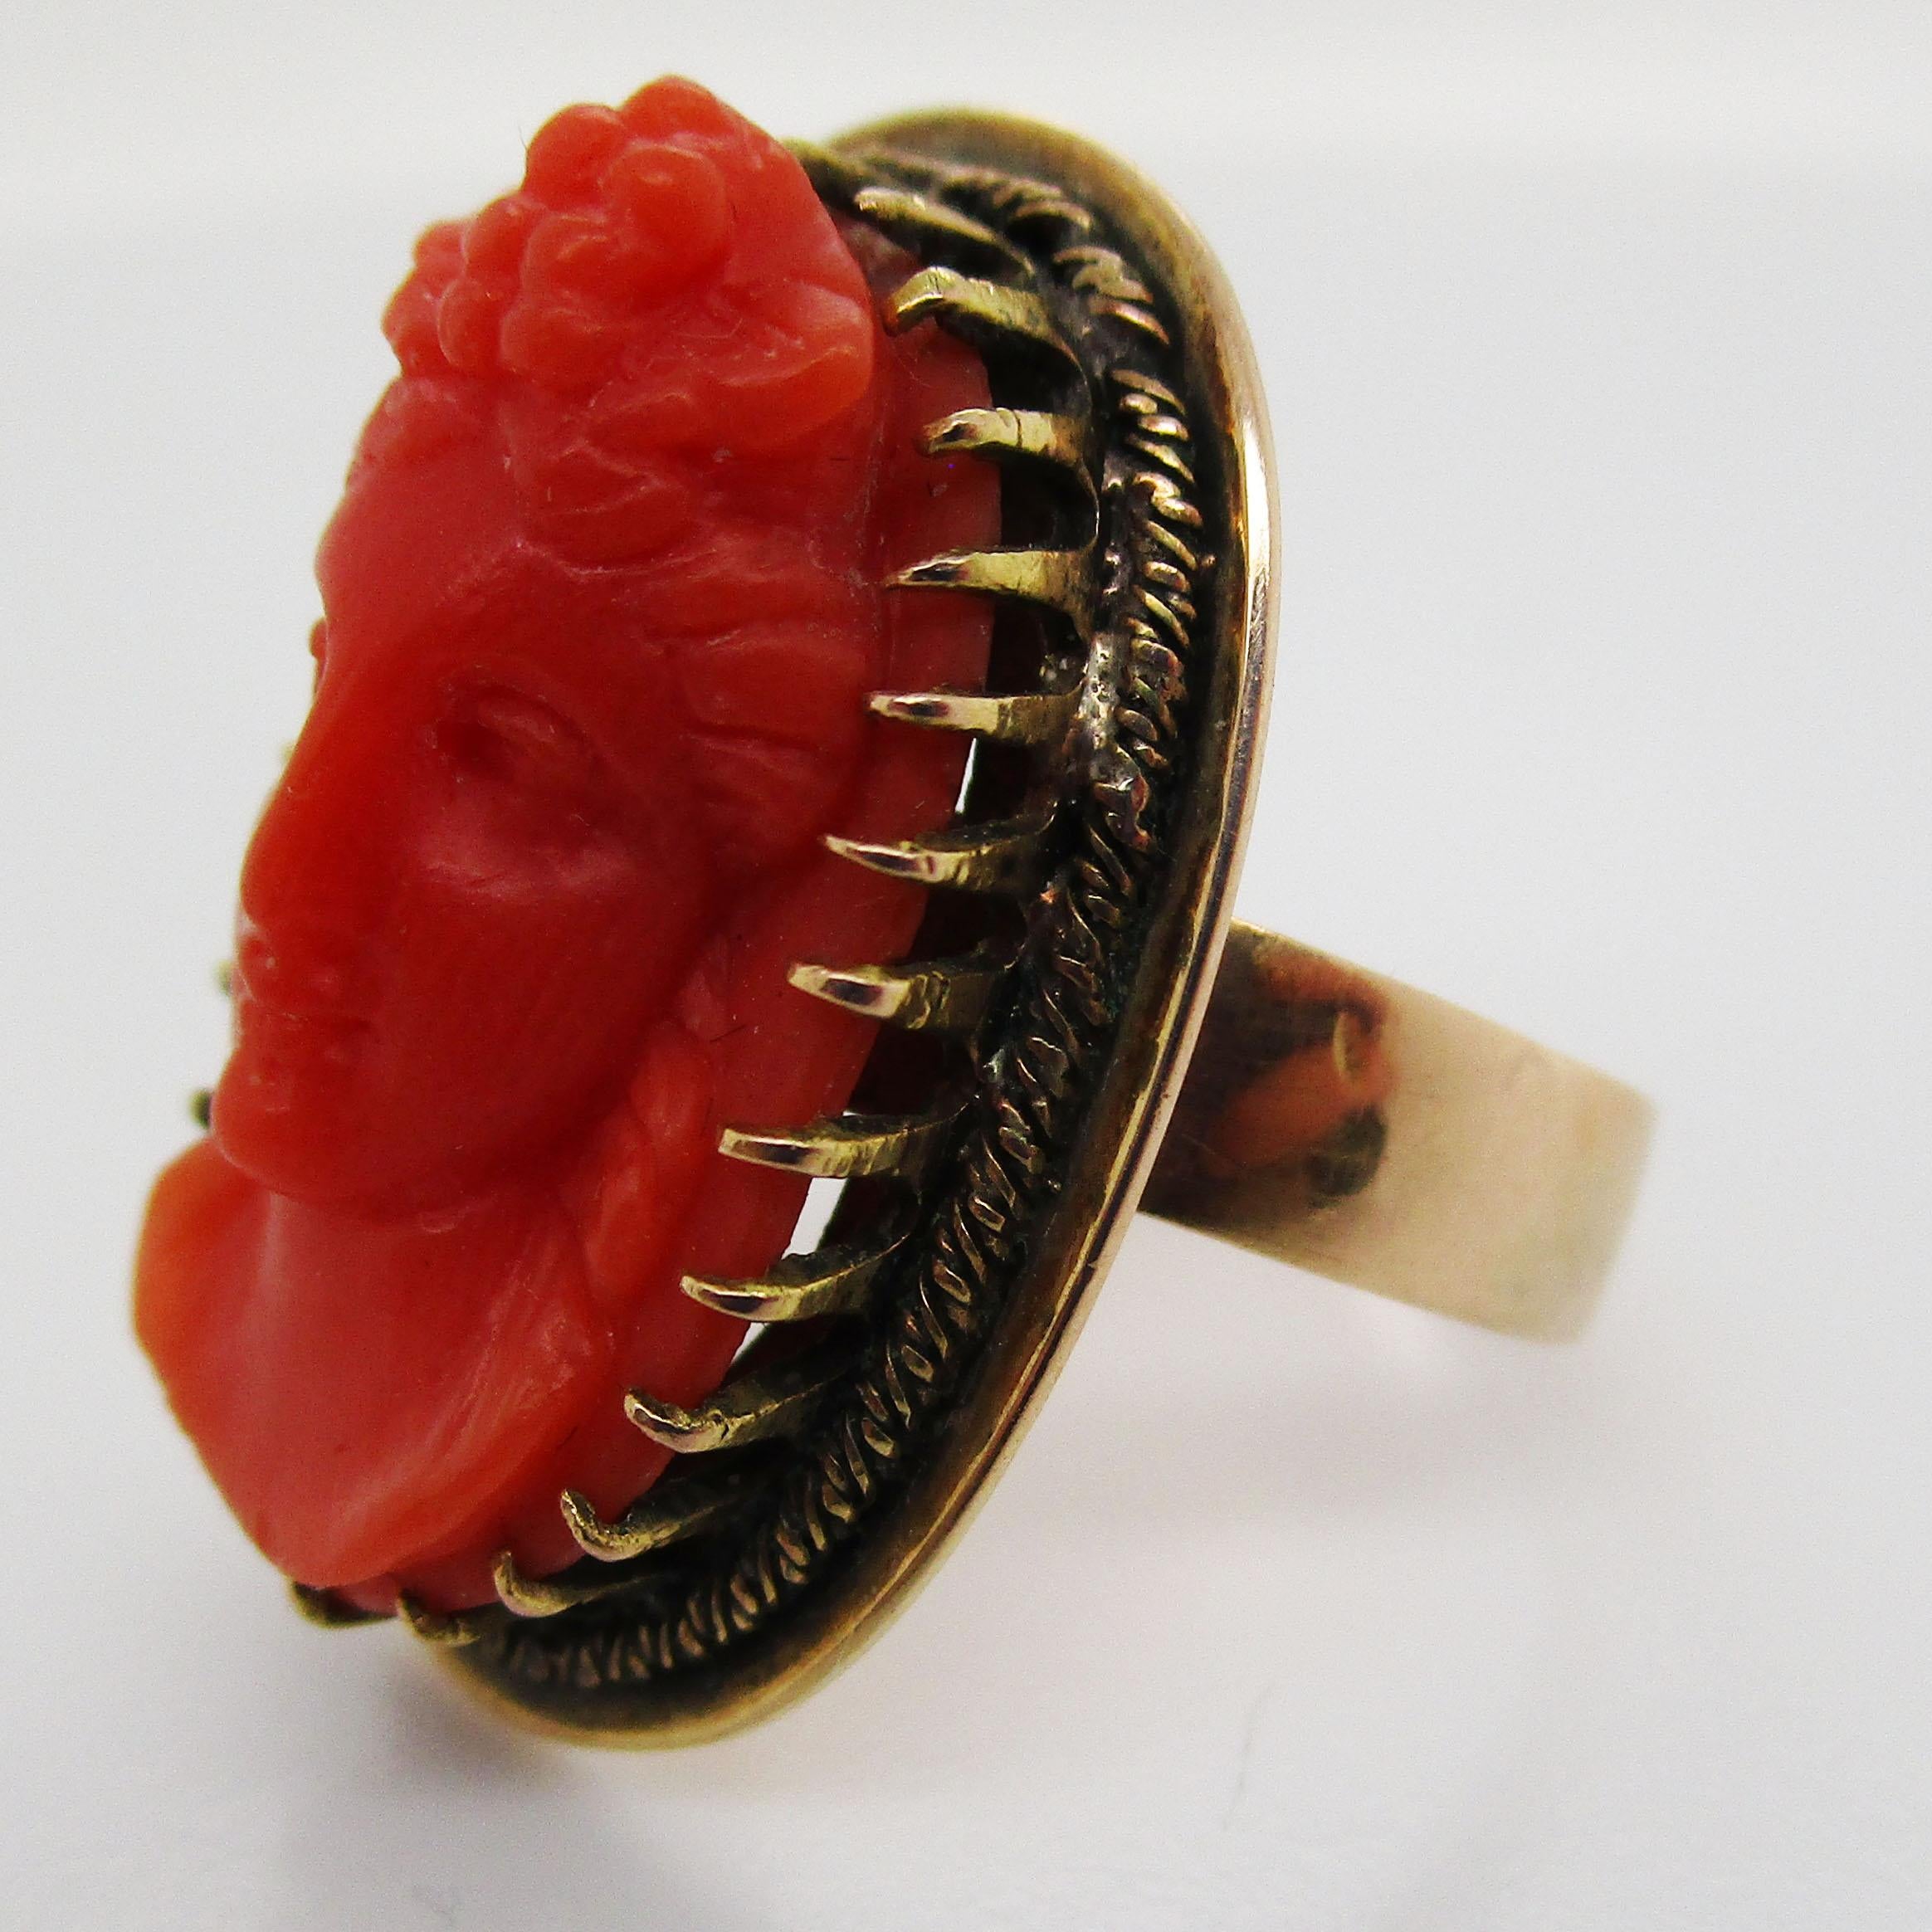 This gorgeous Victorian 14 karat yellow gold ring boasts a hand carved red coral cameo with truly stunning natural untreated color! The beautifully delicate carving is all original and complete, and shows absolutely remarkable detail and skill. The